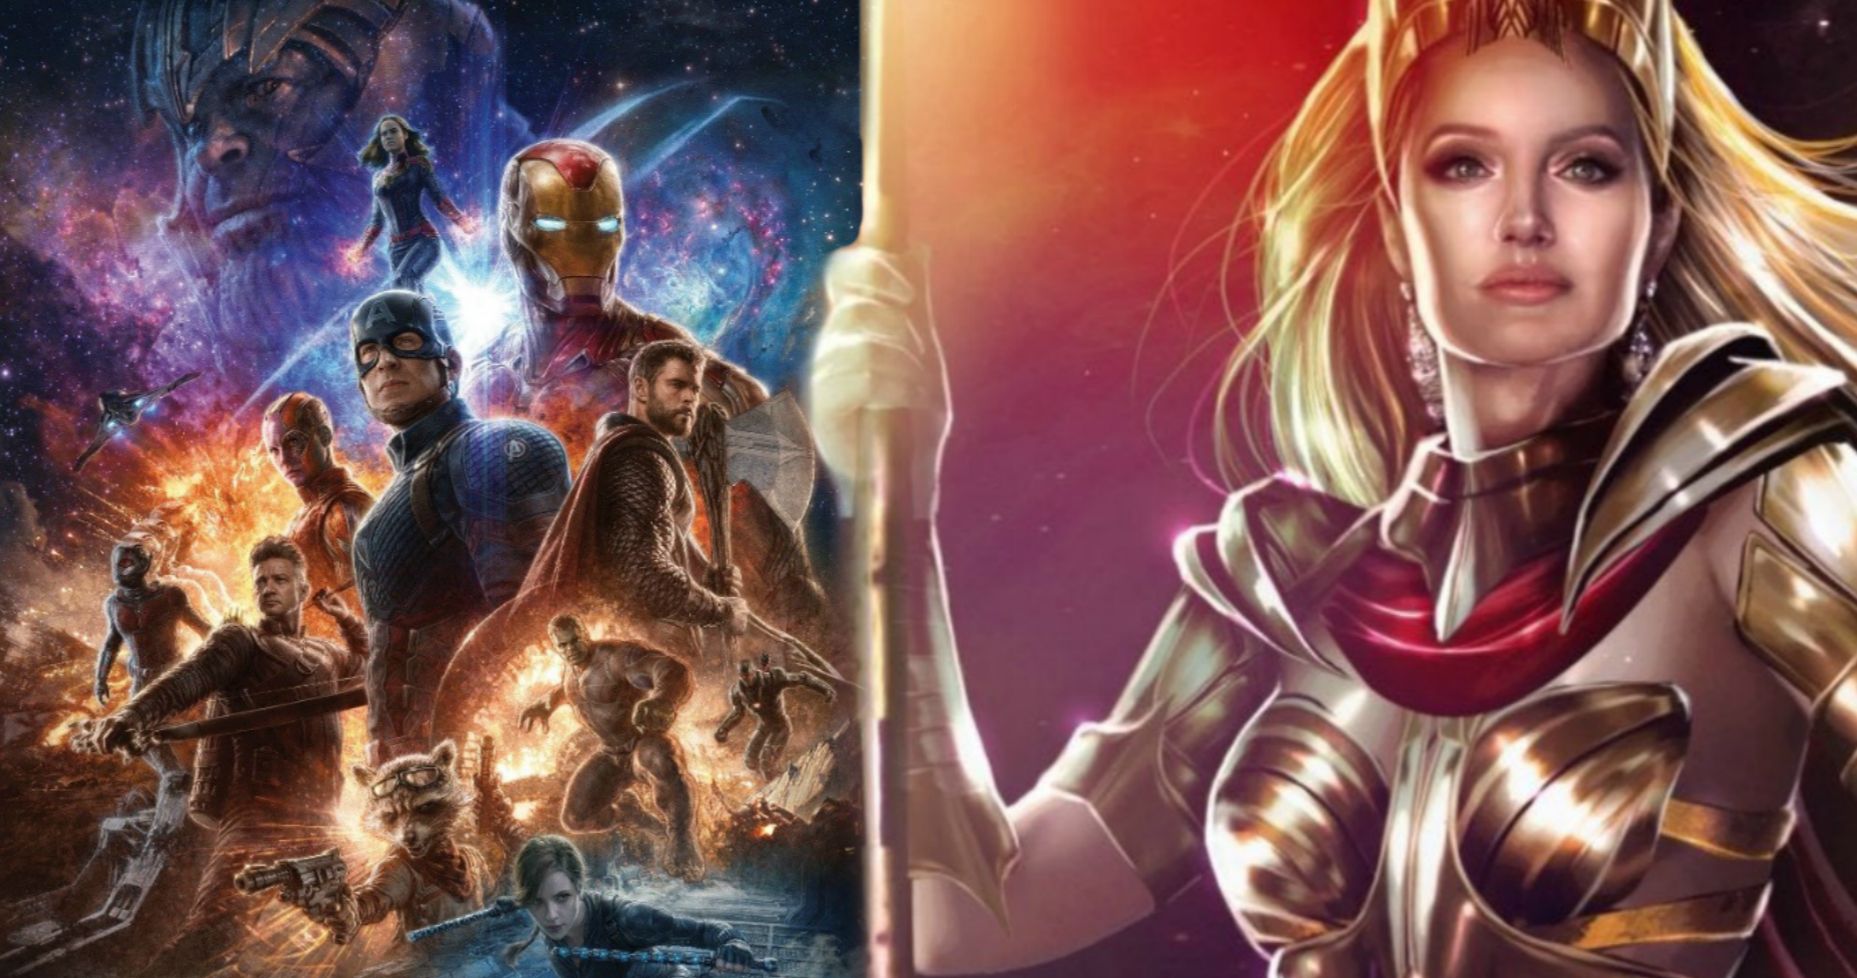 Does Marvel's Eternals Take Place Before or After Avengers: Endgame?